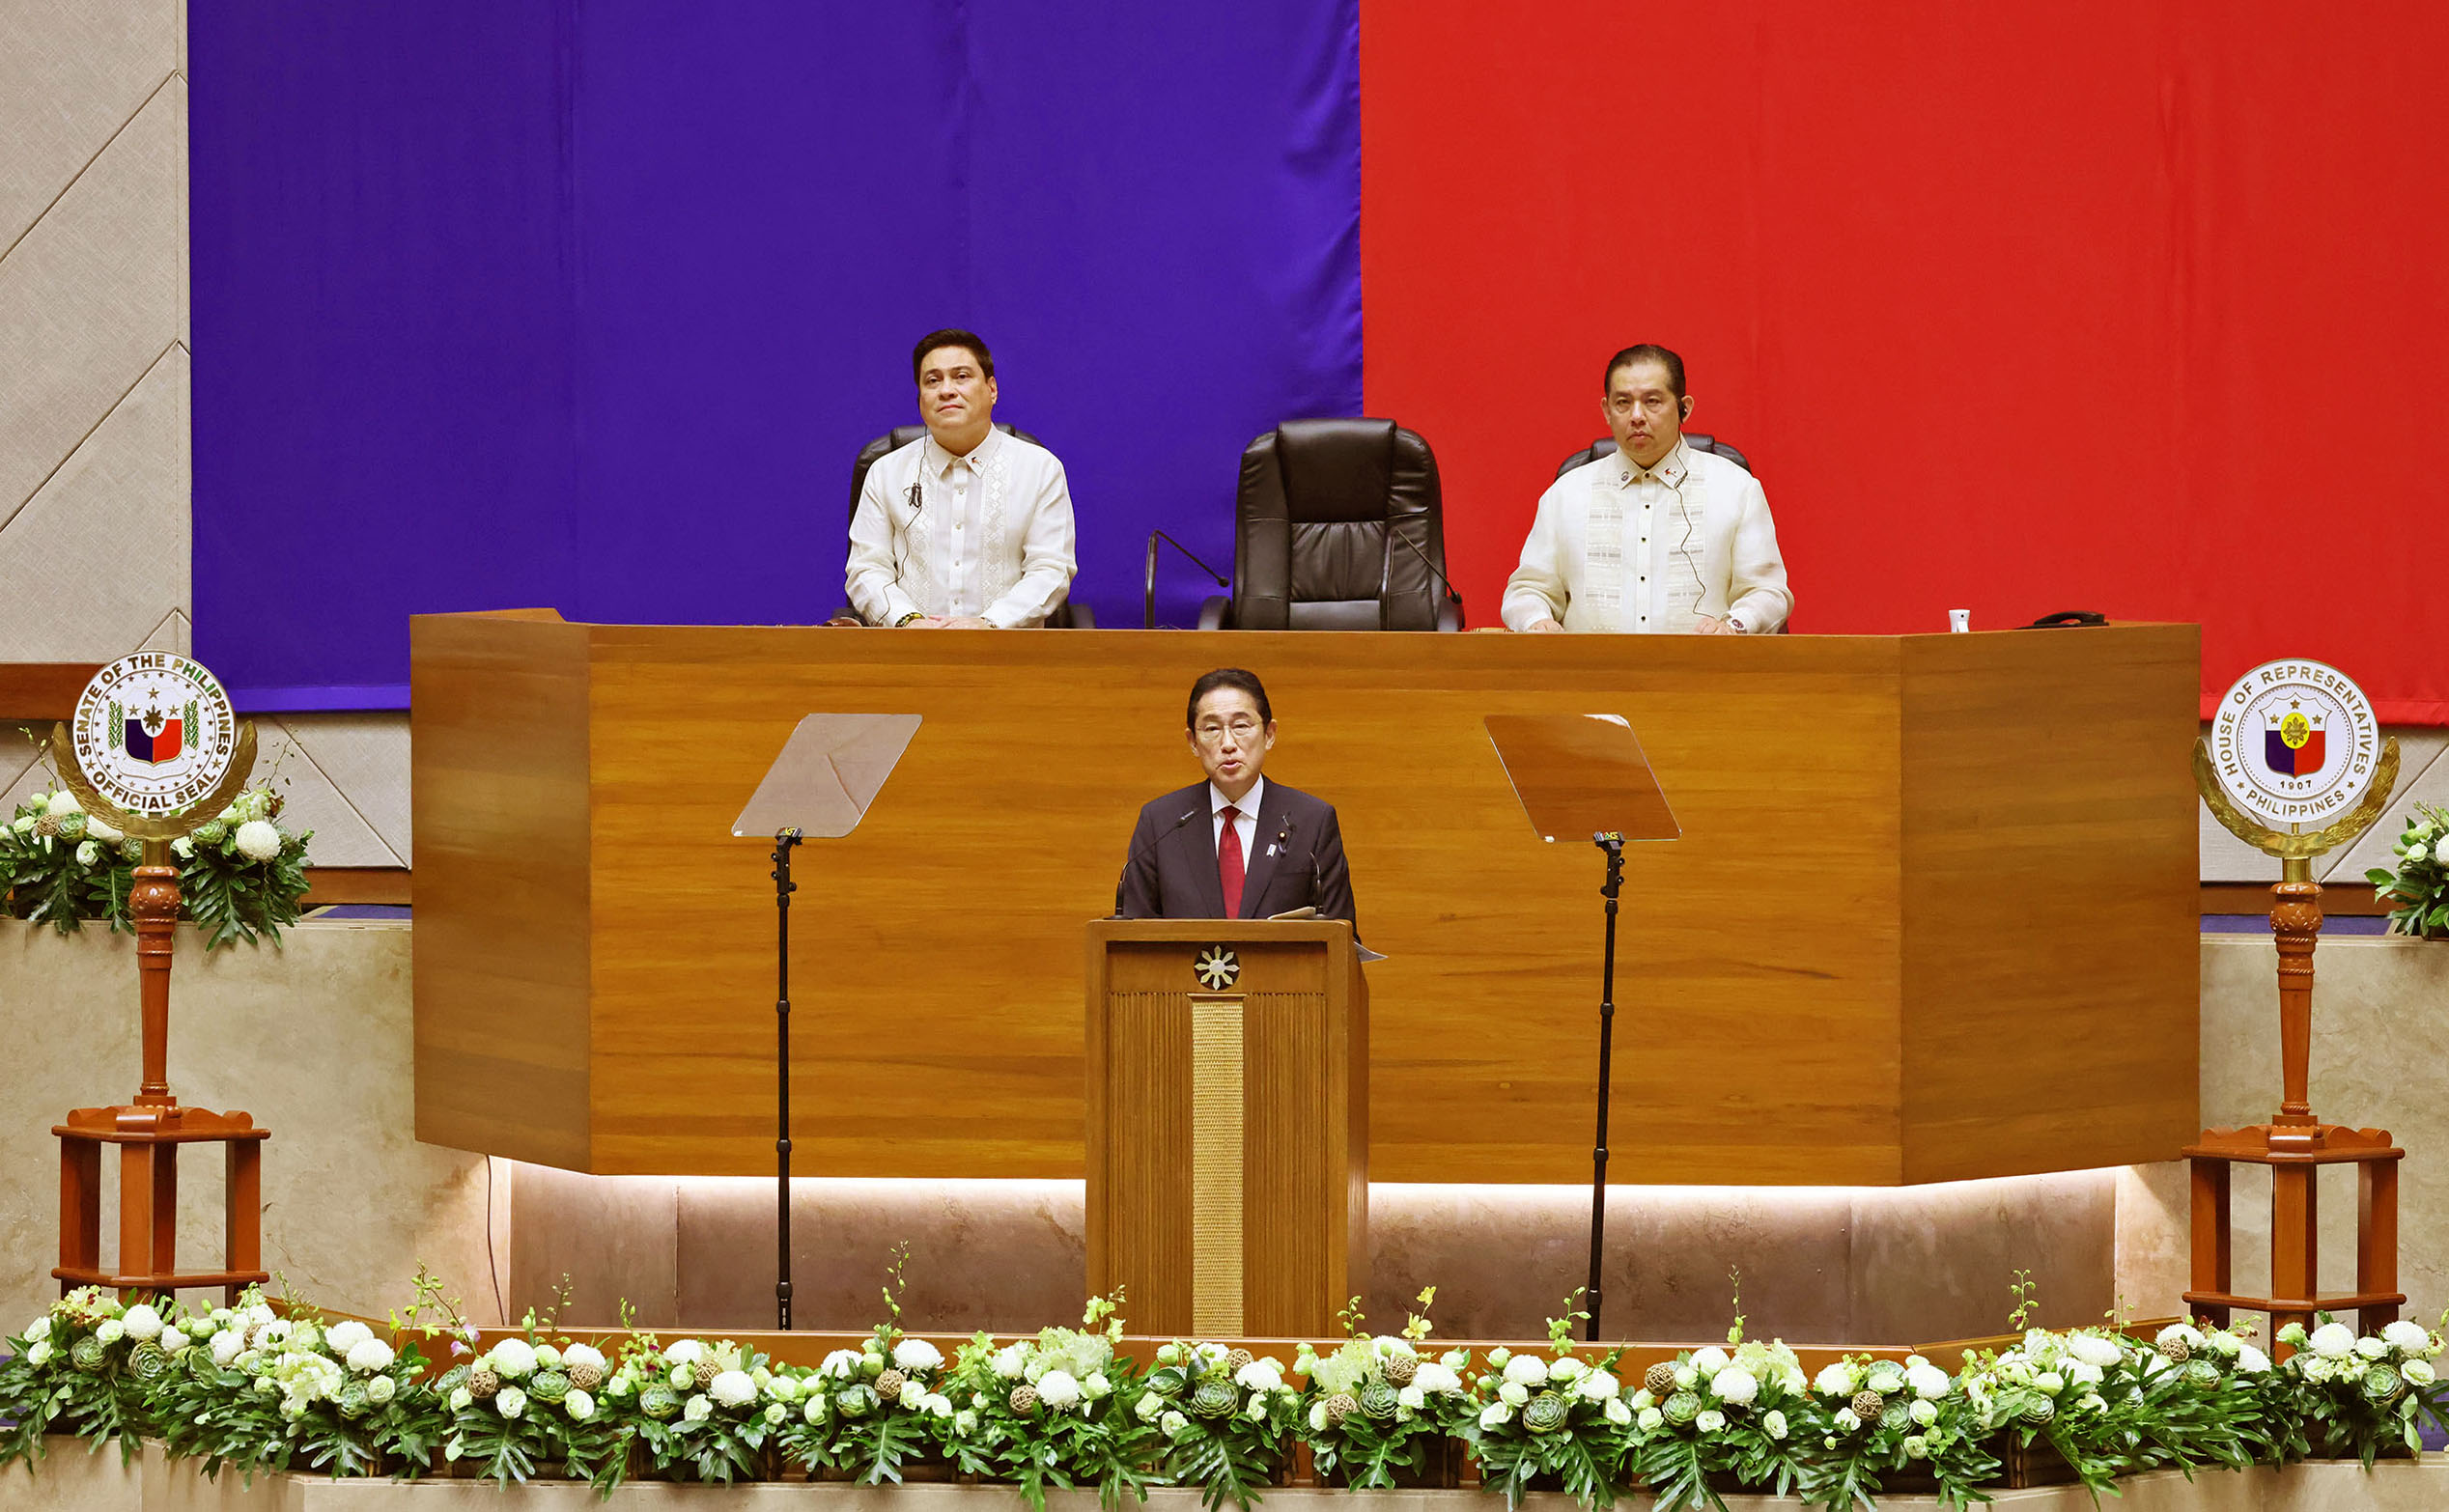 Prime Minister Kishida delivering a policy speech at the Joint Session of the Philippine Senate and House of Representatives (3)